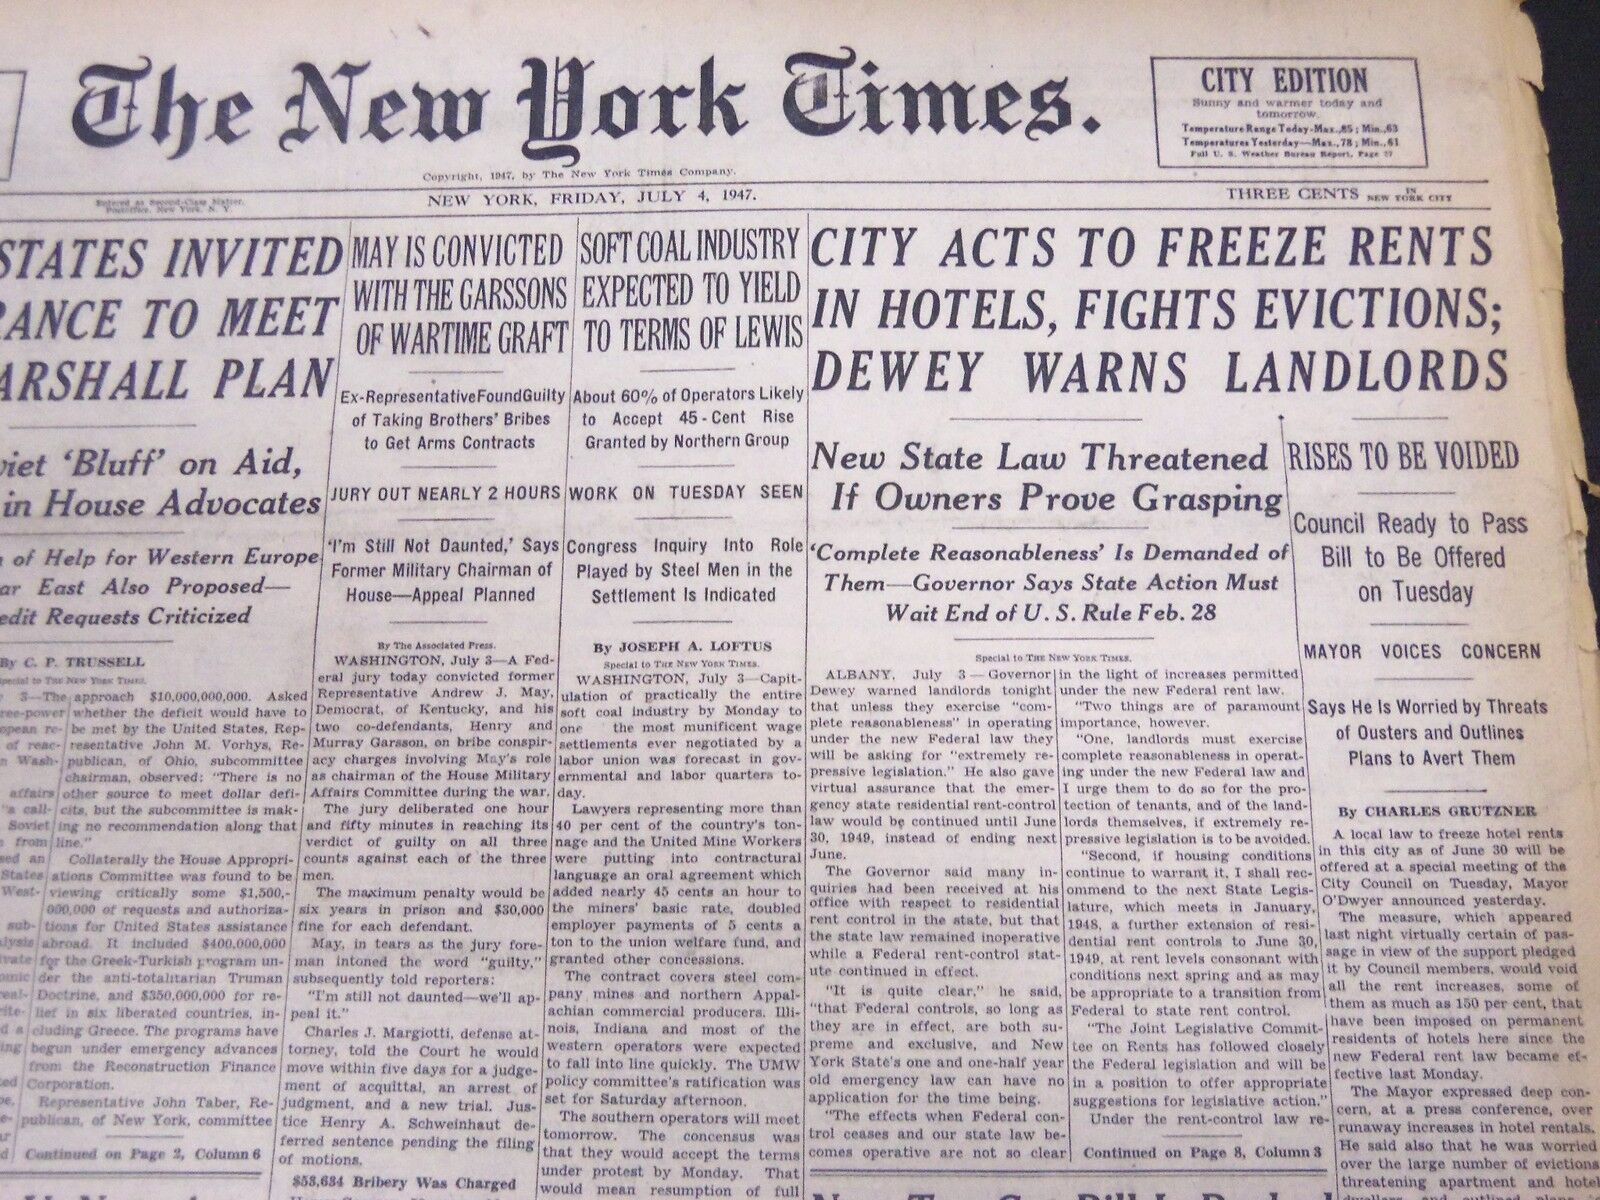 1947 JULY 4 NEW YORK TIMES - CITY ACTS TO FREEZE RENTS IN HOTELS - NT 5169